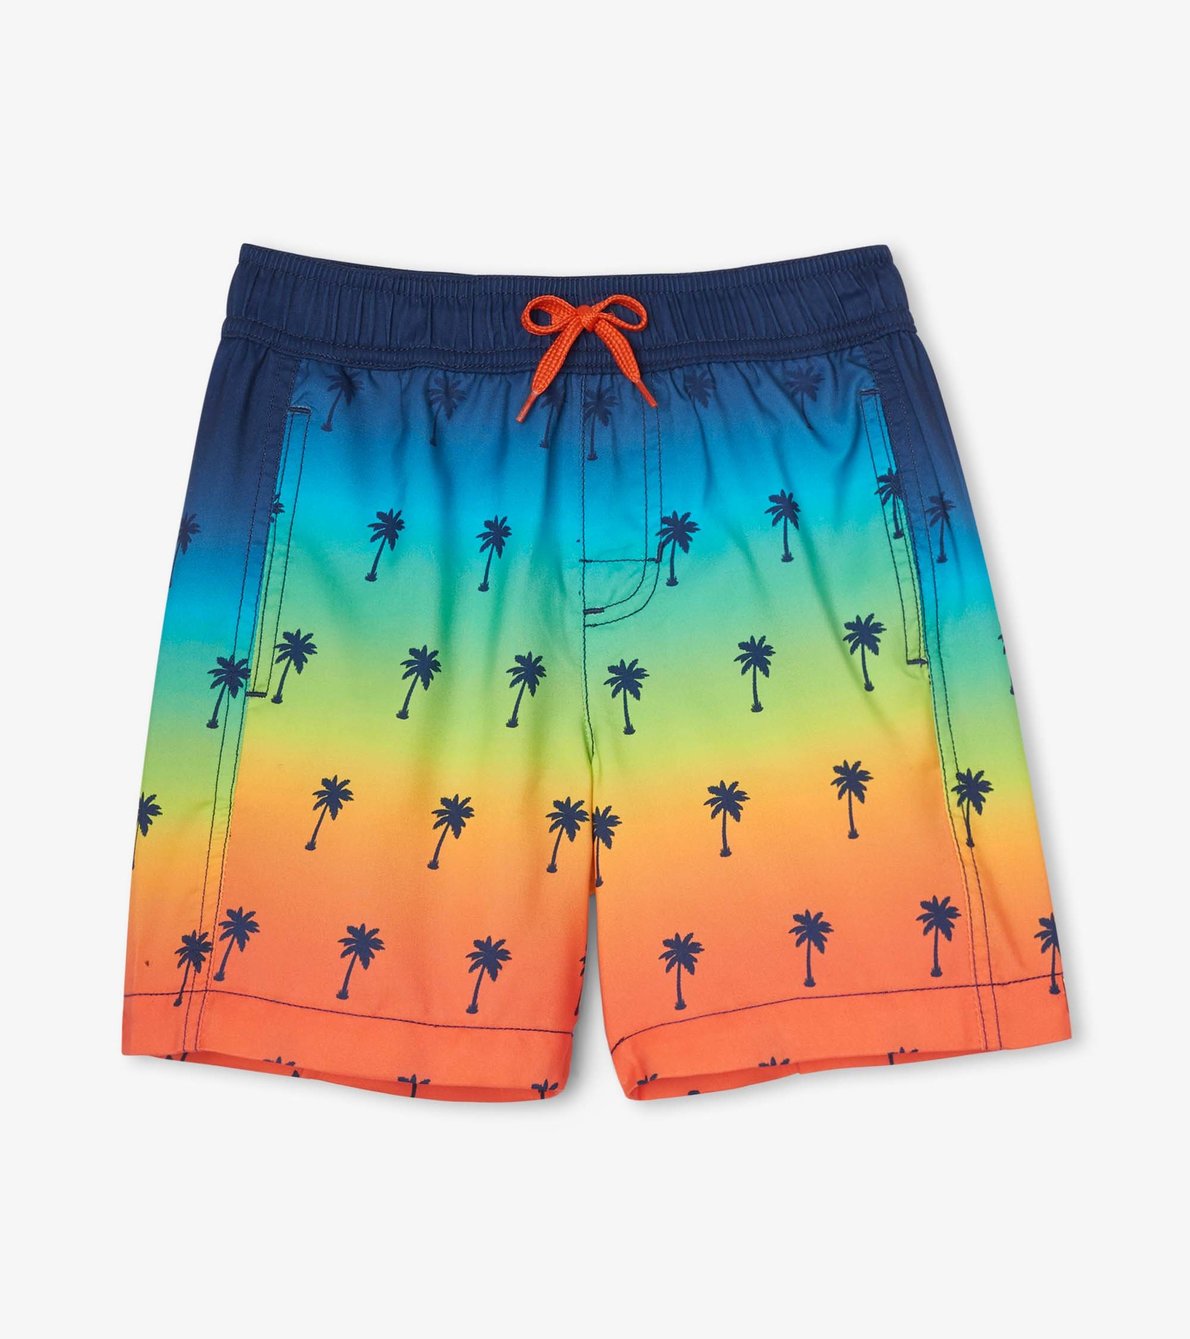 View larger image of Tropical Palms Swim Trunks